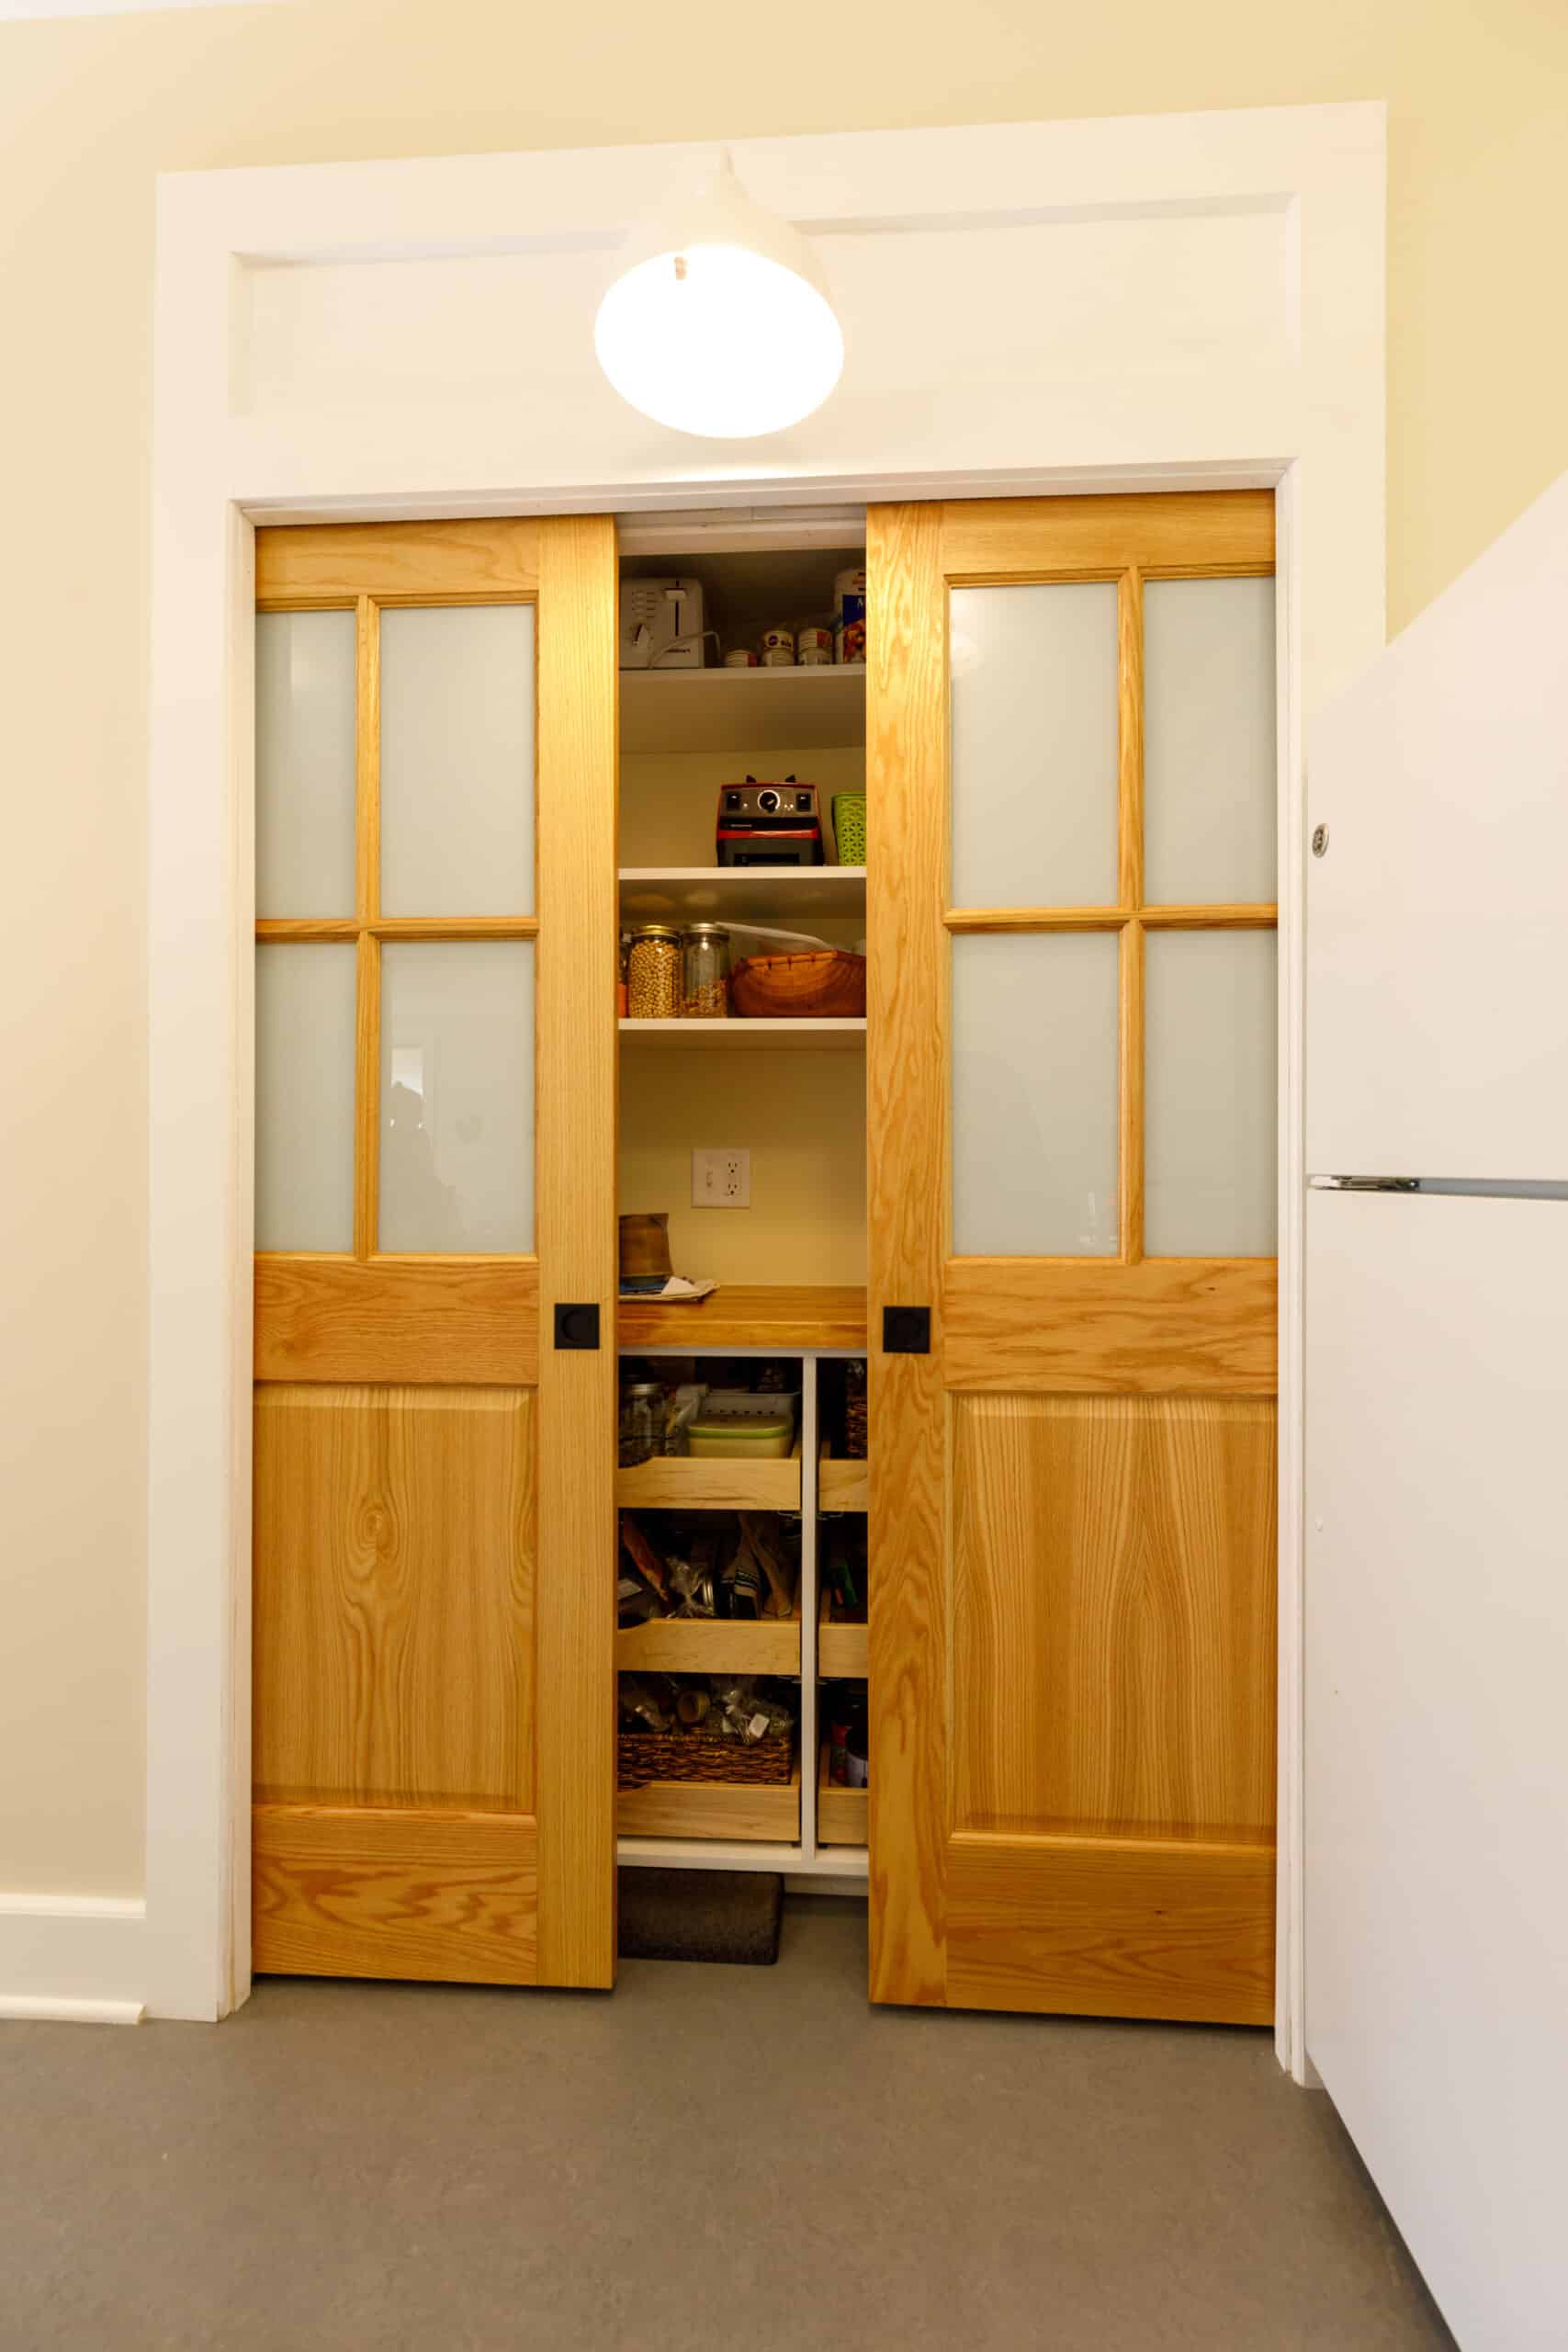 Pantry in upstairs home addition